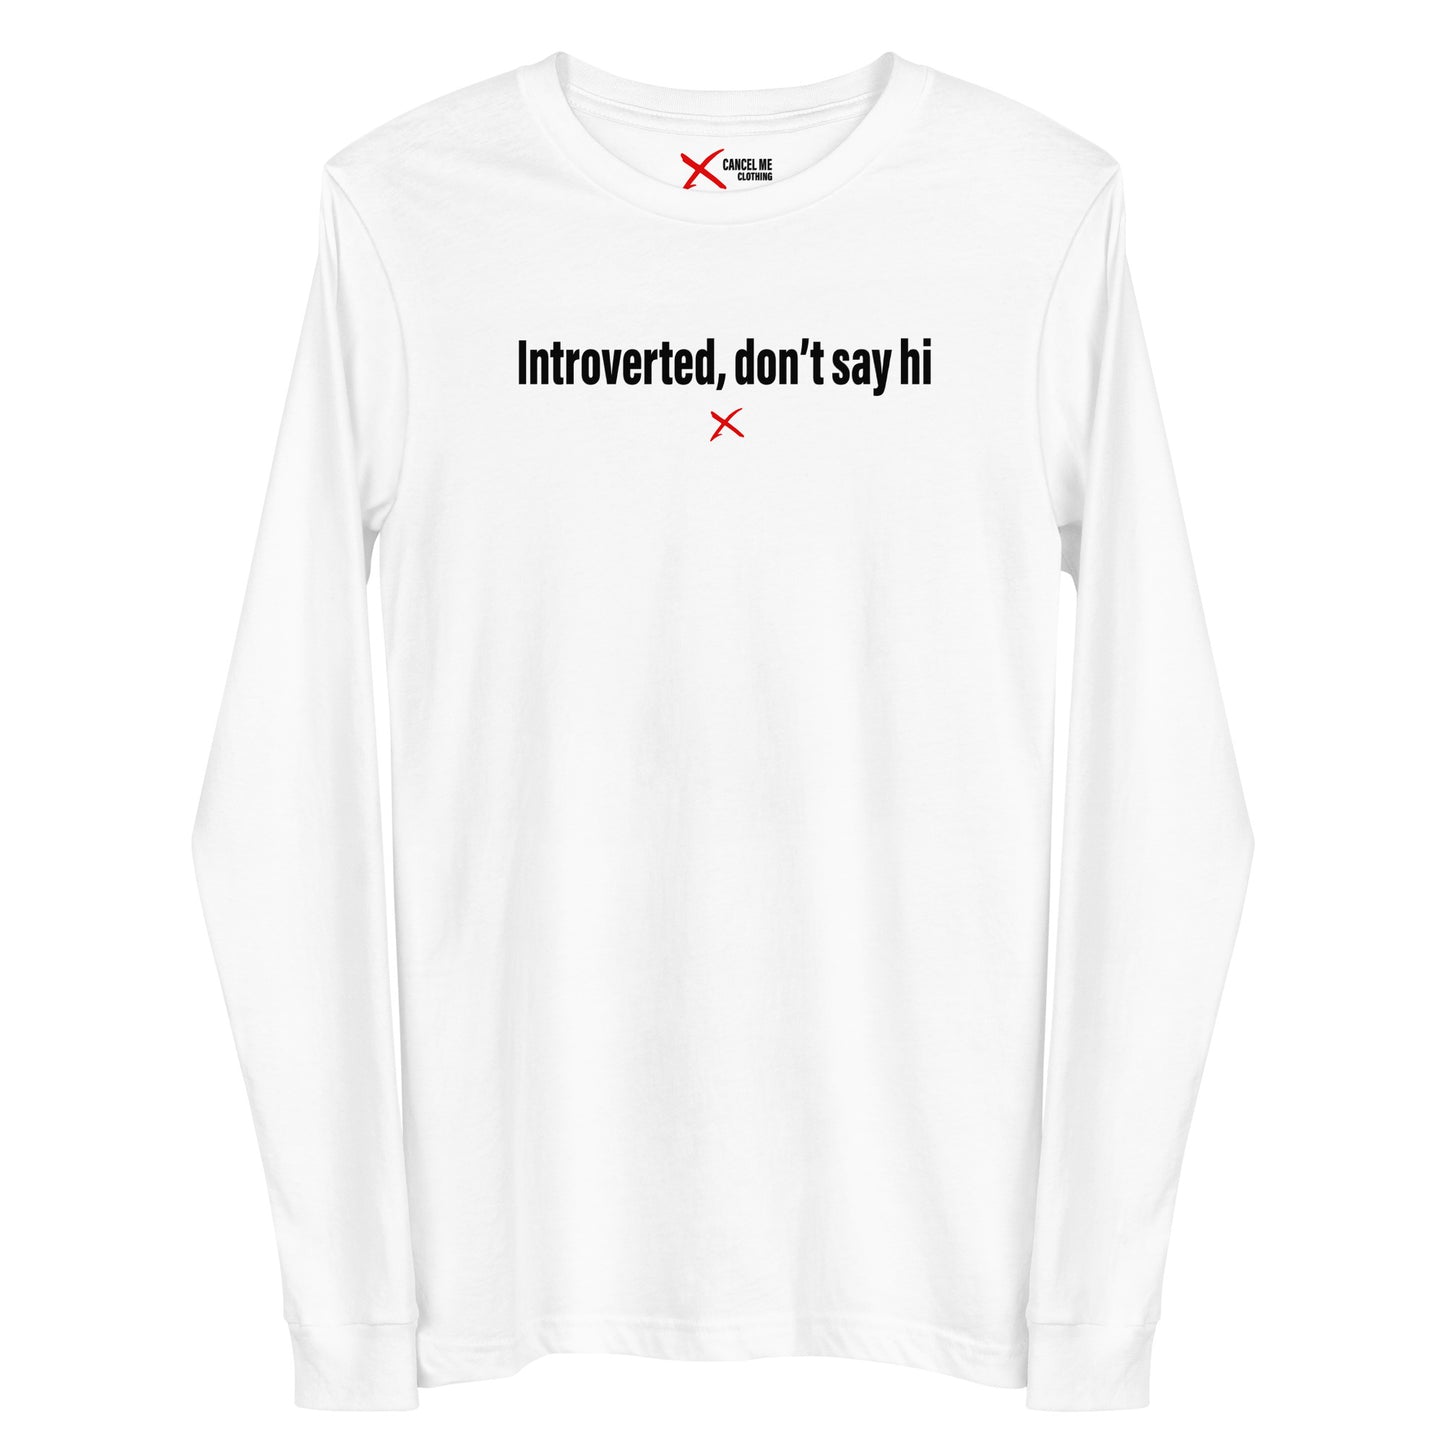 Introverted, don't say hi - Longsleeve